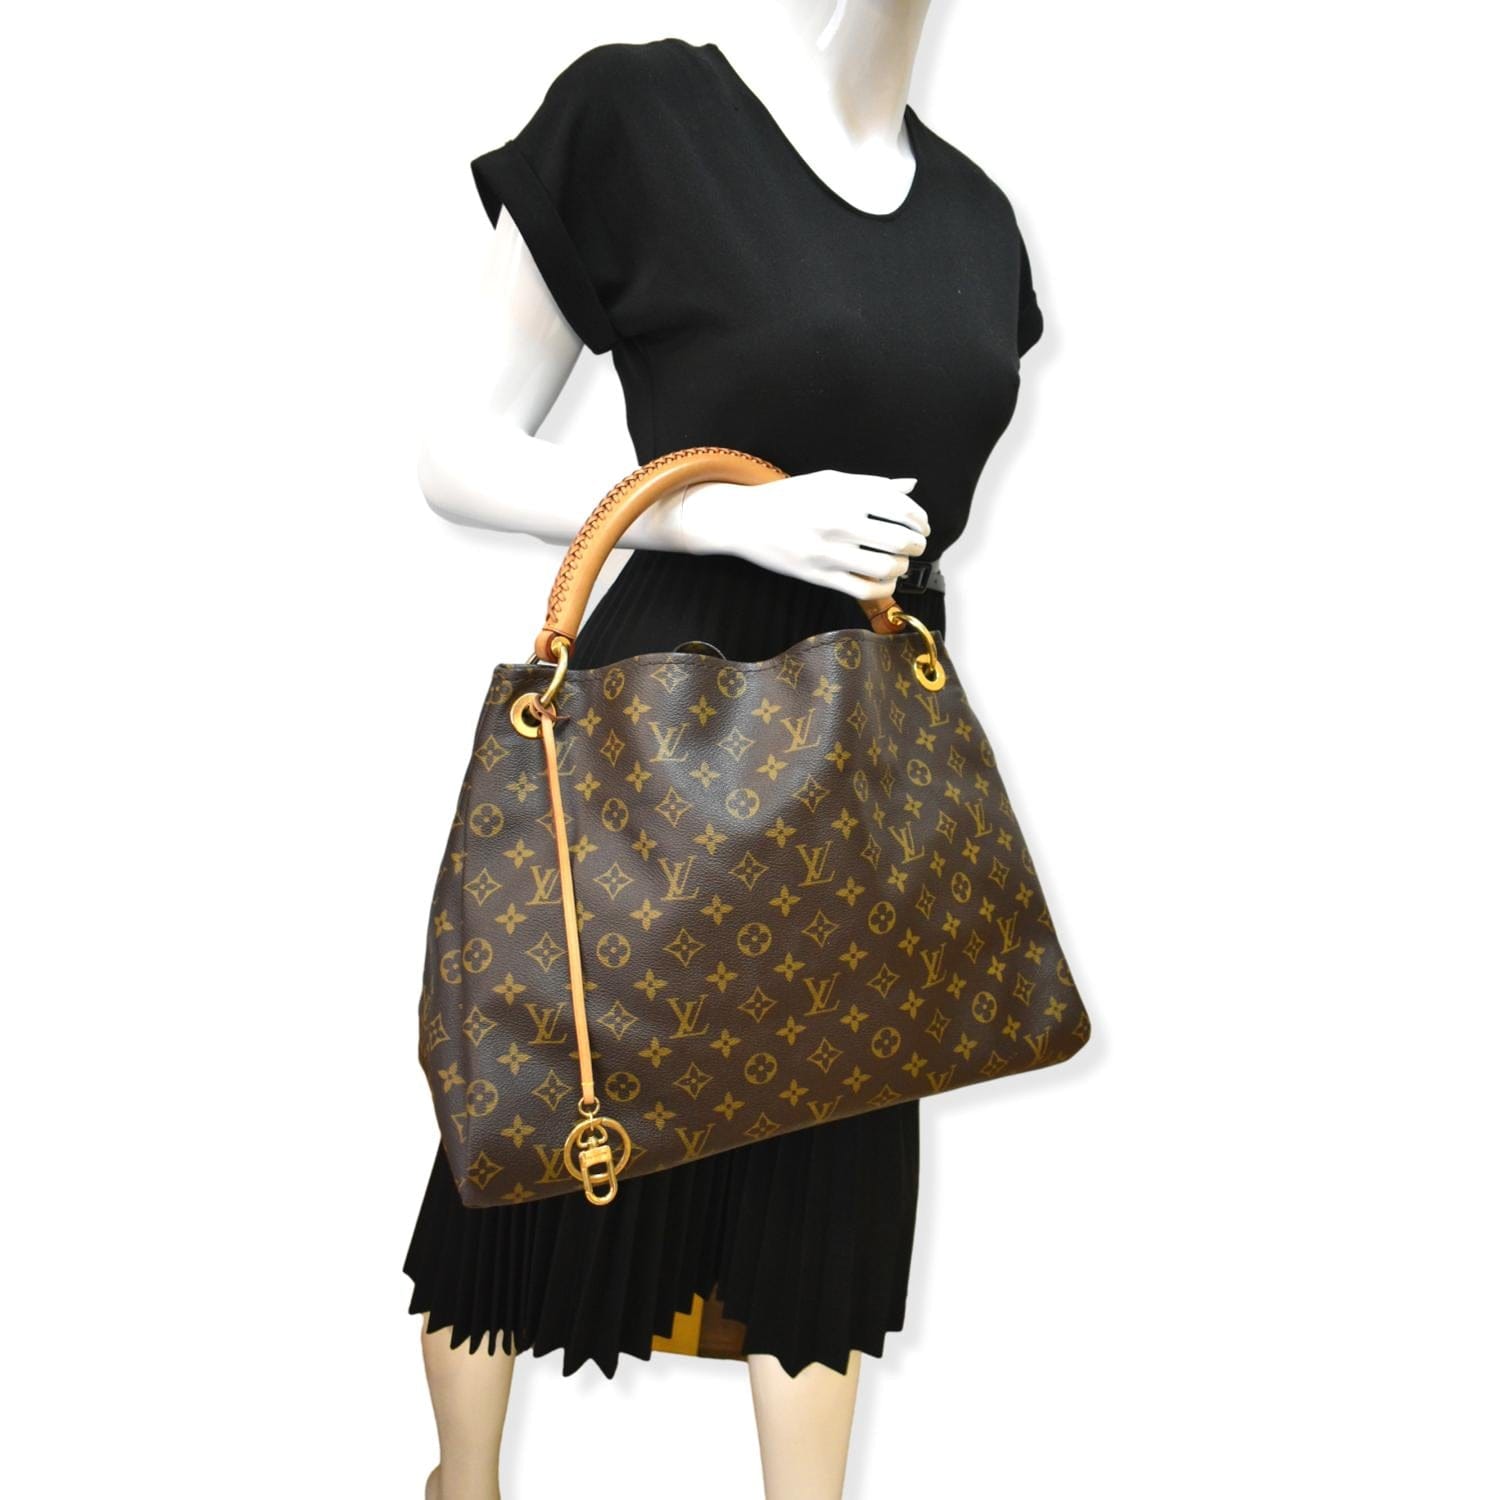 Ootd outfit of the day Louis Vuitton monogram artsy mm 